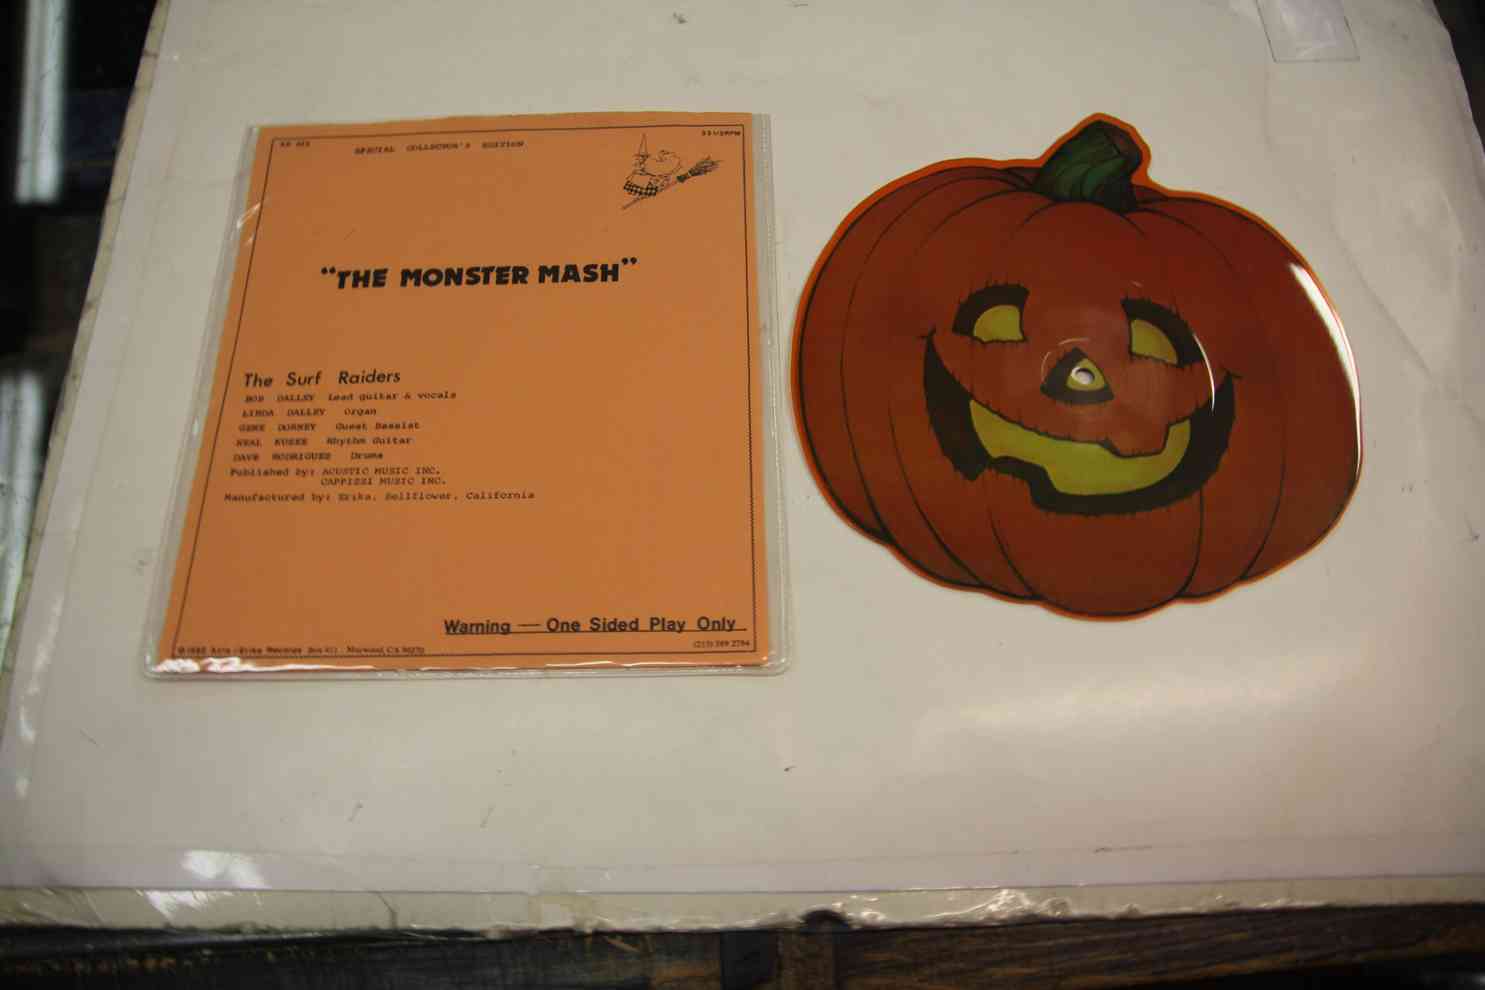 SURF RAIDERS - THE MONSTER MASH - SHAPE PICTURE SINGLE